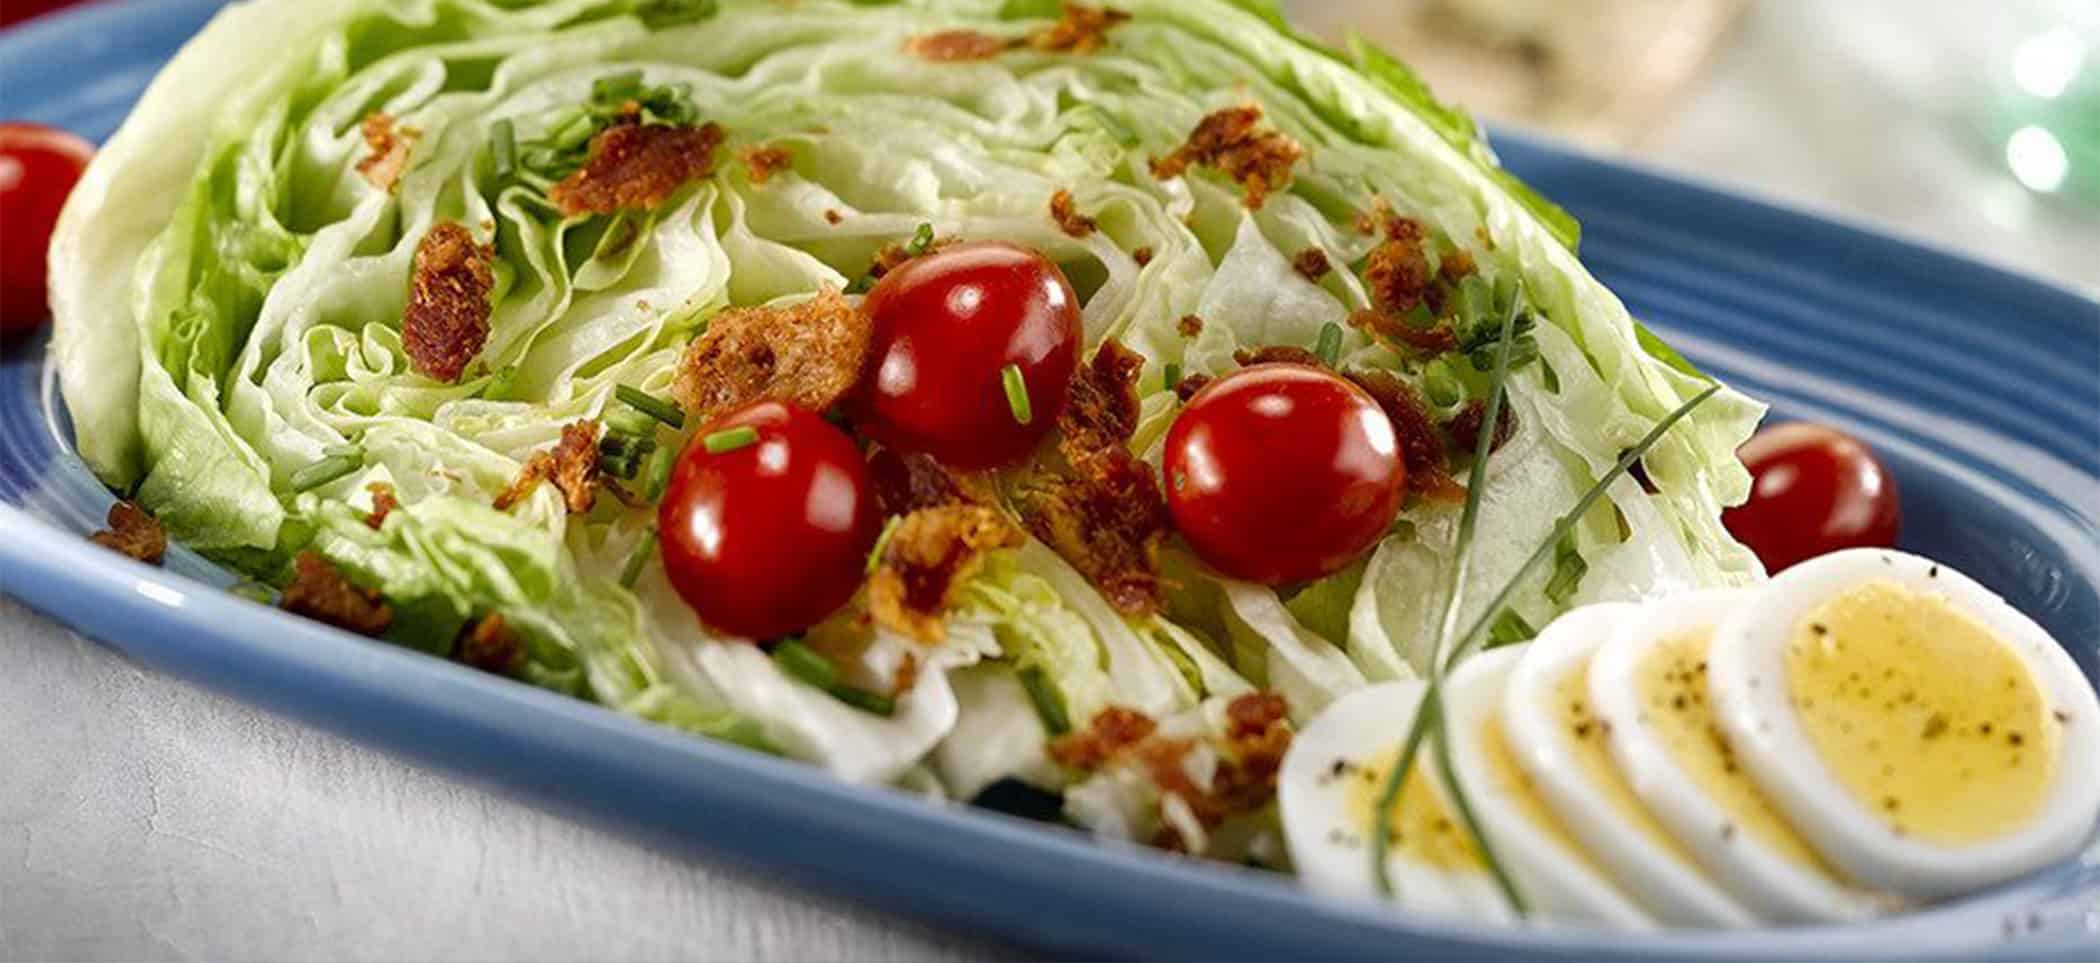 Wedge Salad with Hard-Boiled Egg